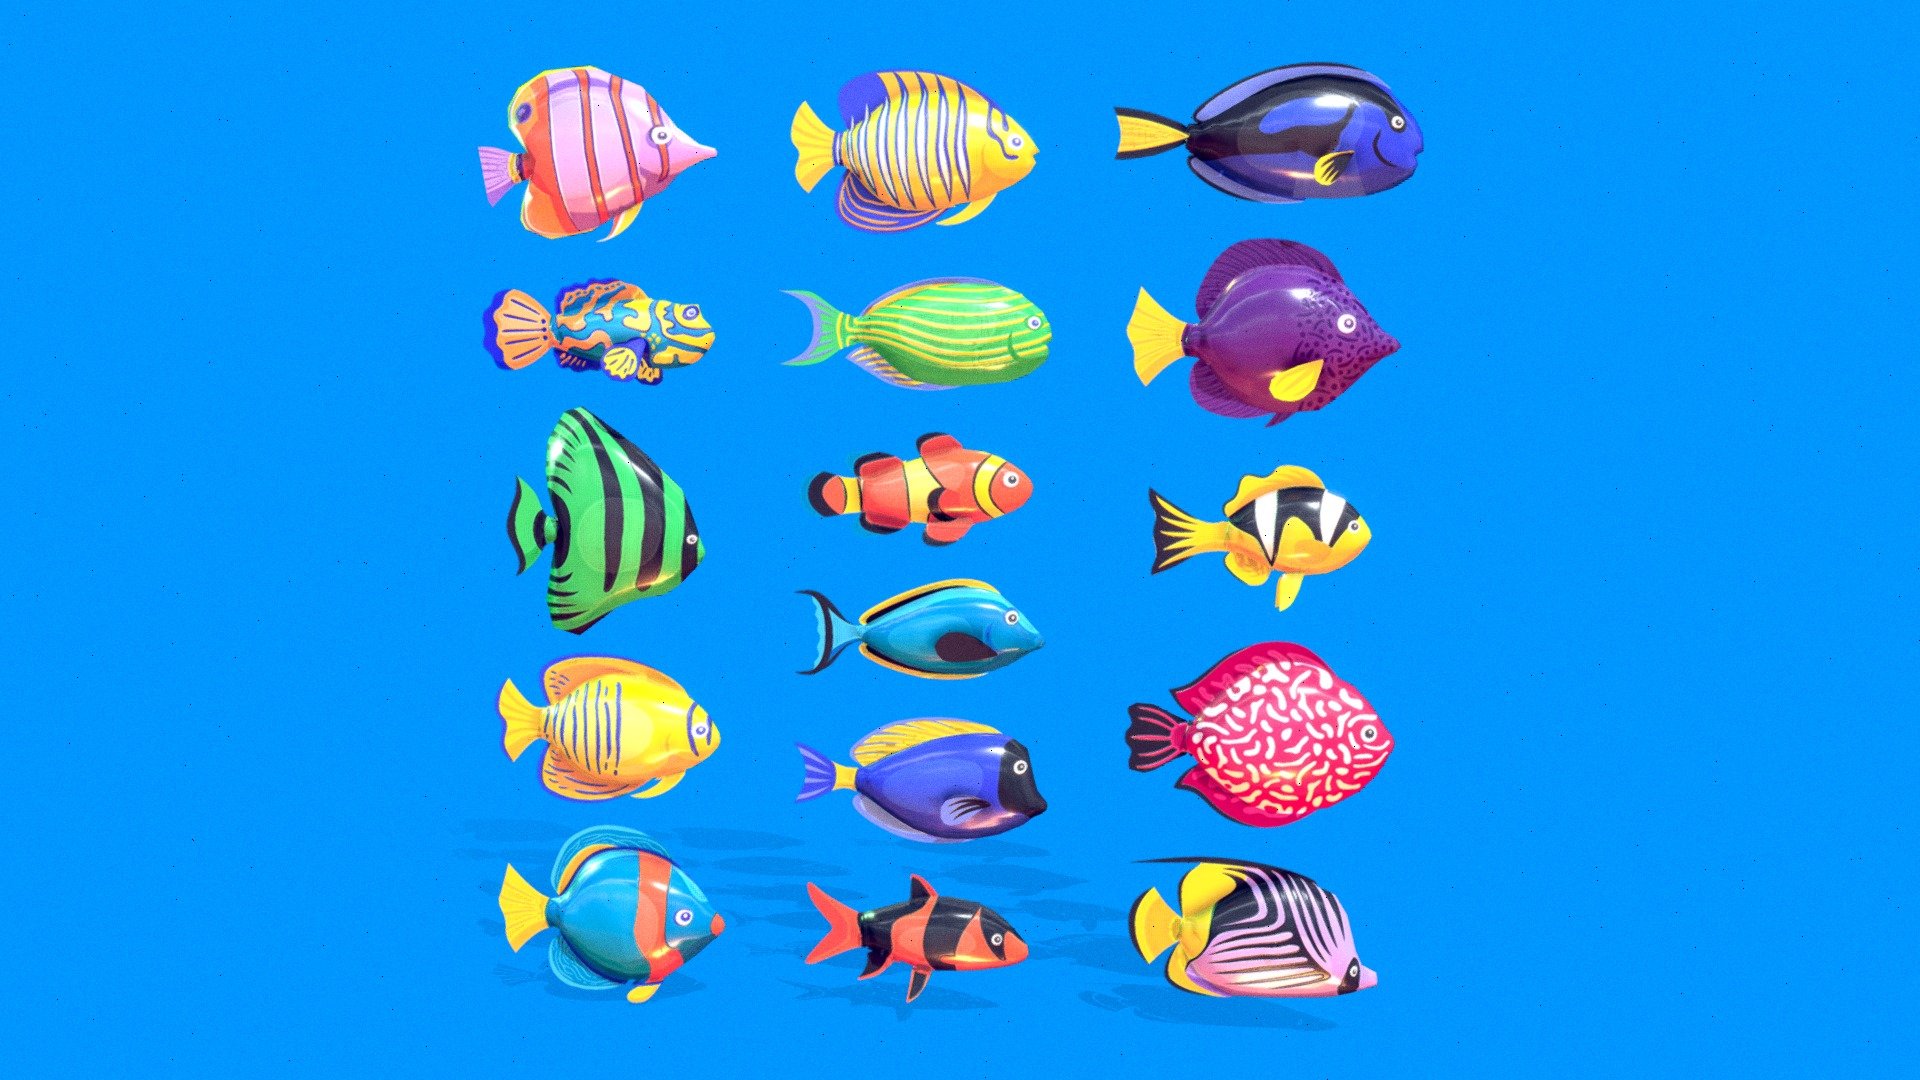 Lowpoly Fish Toon Pack

This pack is modeled and textured in Blender.  Feel free to use it in anyway you like. If you love this model you can give it a like or comment or maybe a follow? let’s be friends ^_^, you can also visit my profile for more free stuff or if you want to support me you can buy some of my paid asset. I hope you have a great day 3d model